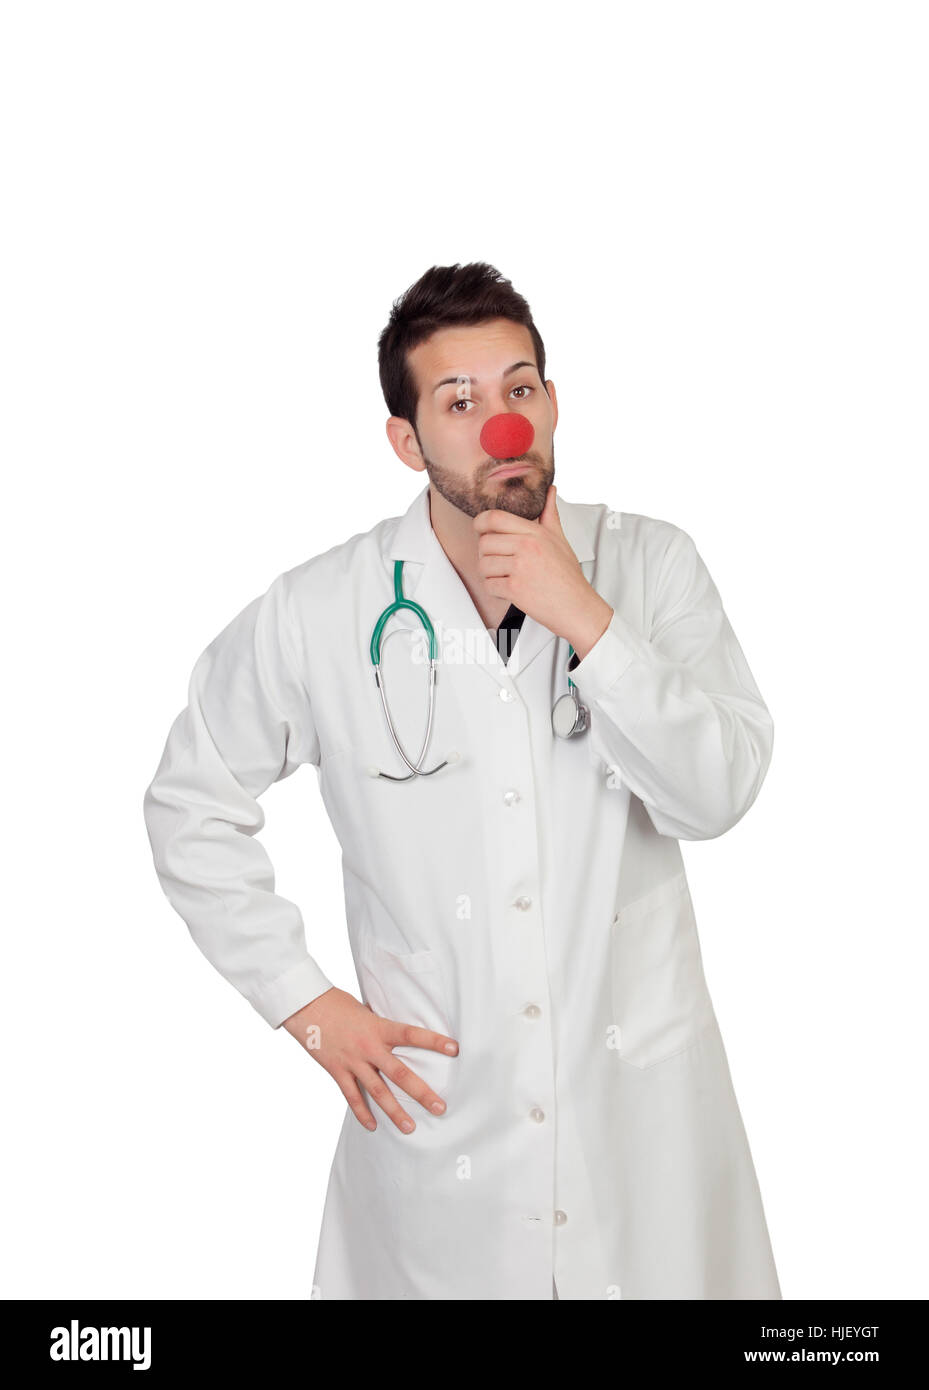 doctor, physician, medic, medical practicioner, think, thoughts, chin, doctor, Stock Photo